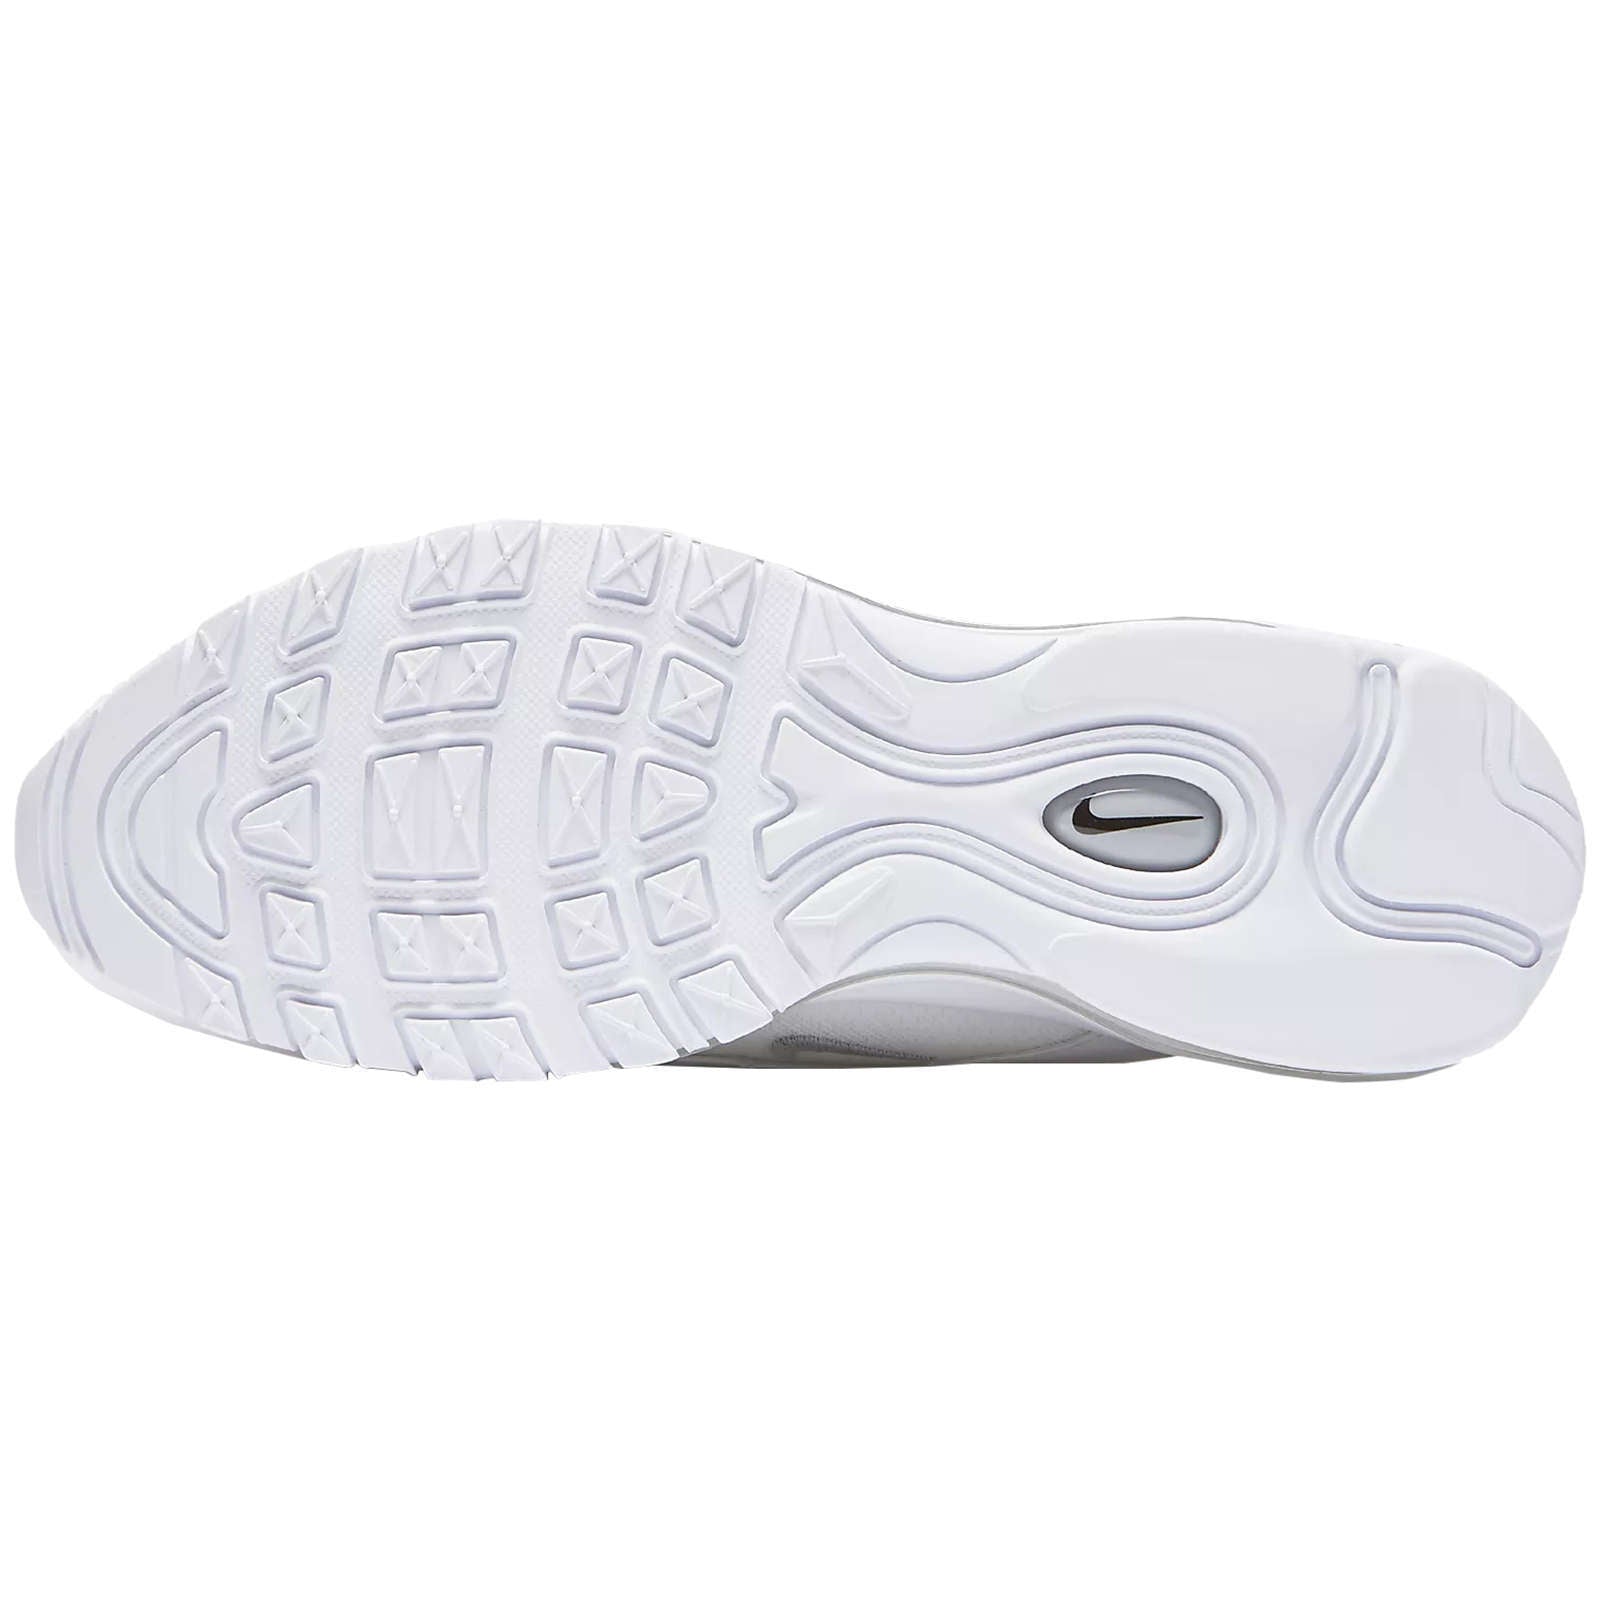 Nike Air Max 97 Synthetic Textile Men's Low-Top Trainers#color_white wolf grey